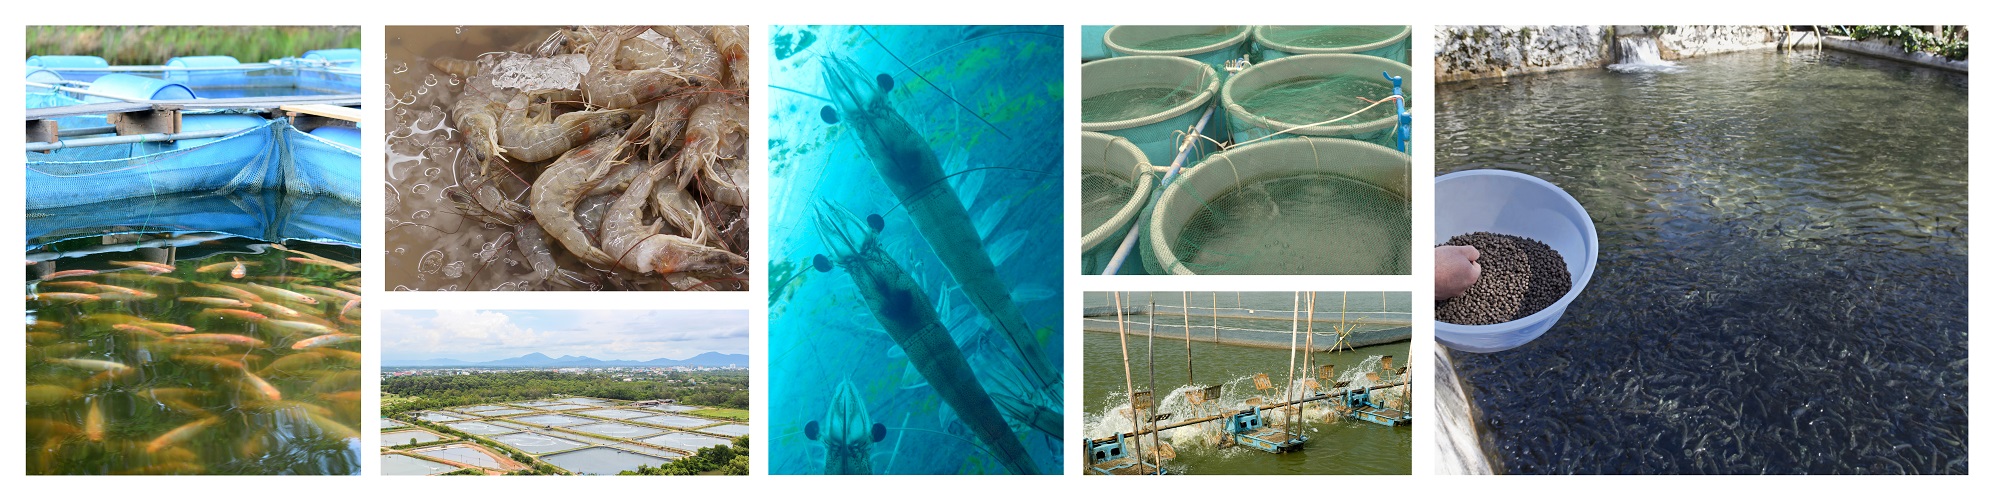 understand the various actors affecting shrimp aquaculture from feed quality, water aquality, water recycling process, diseases caused by natural and human interventions to importance of soil quality, nutrient availability, microbiome communities in pond and lake water. shrimp farming can get affected by stunted growth of species, decreased survival rates, increase suscepibility to disease. deficiency of calcium in water causes bad effect on aquatic produce